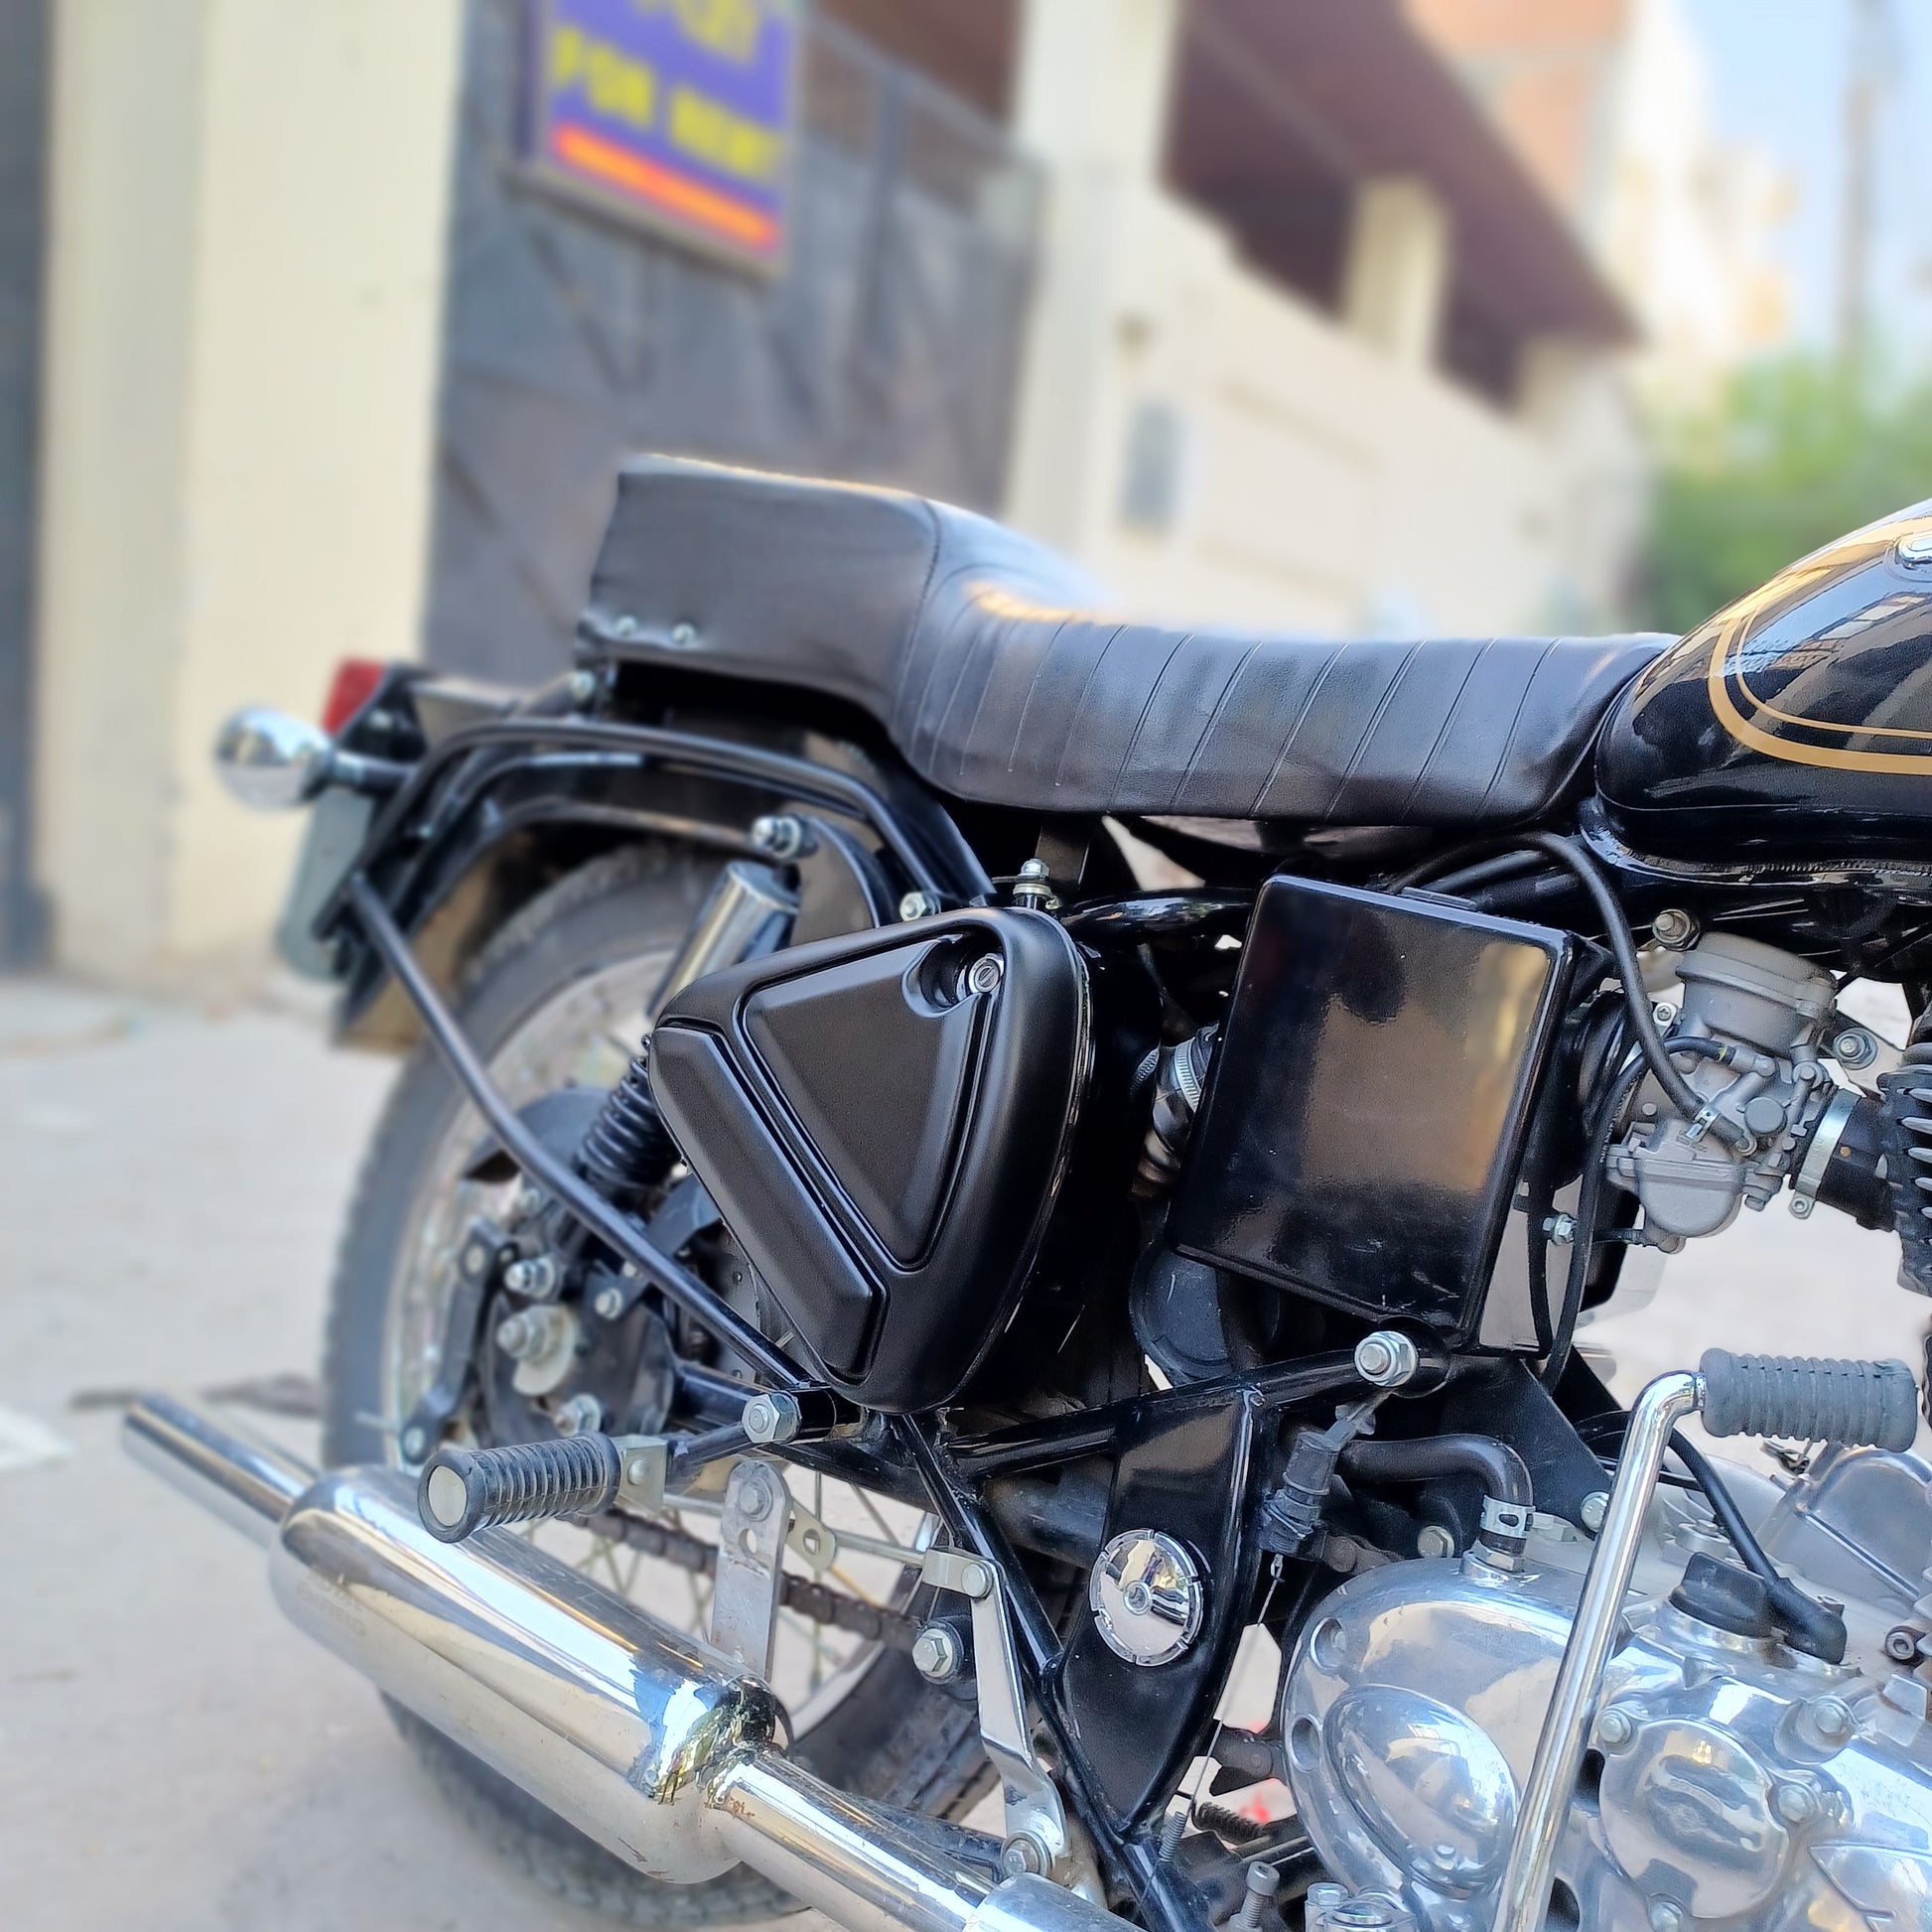 Classic 350 Accessories | Bullet Accessories | Modified Royal Enfield Classic 350 Bullet | Best RE Classic Bullet Modification | Stylish Tool Box Cover | Bull Buckle | Saiga Parts for Royal Enfield Classic Bullet Electra Standard